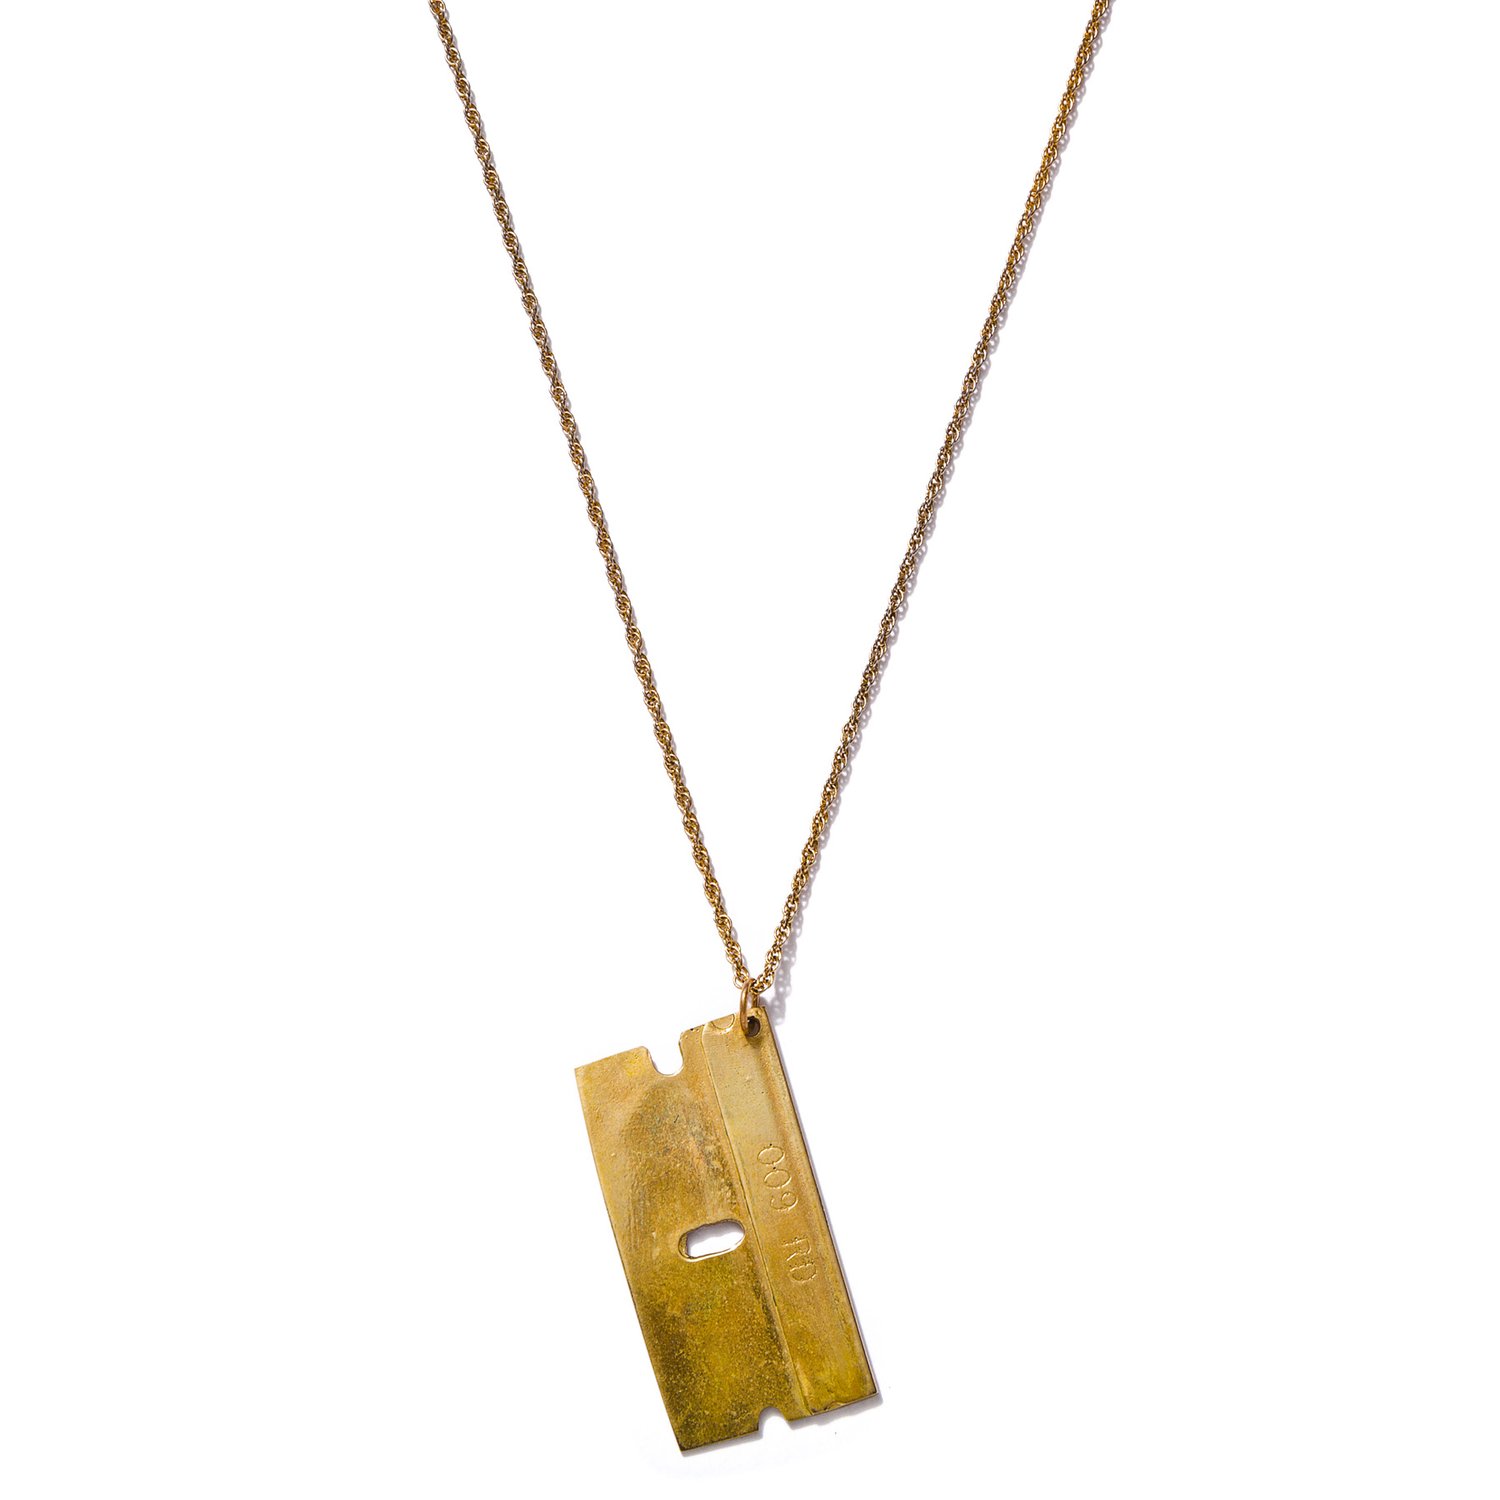 razor blade necklace meaning